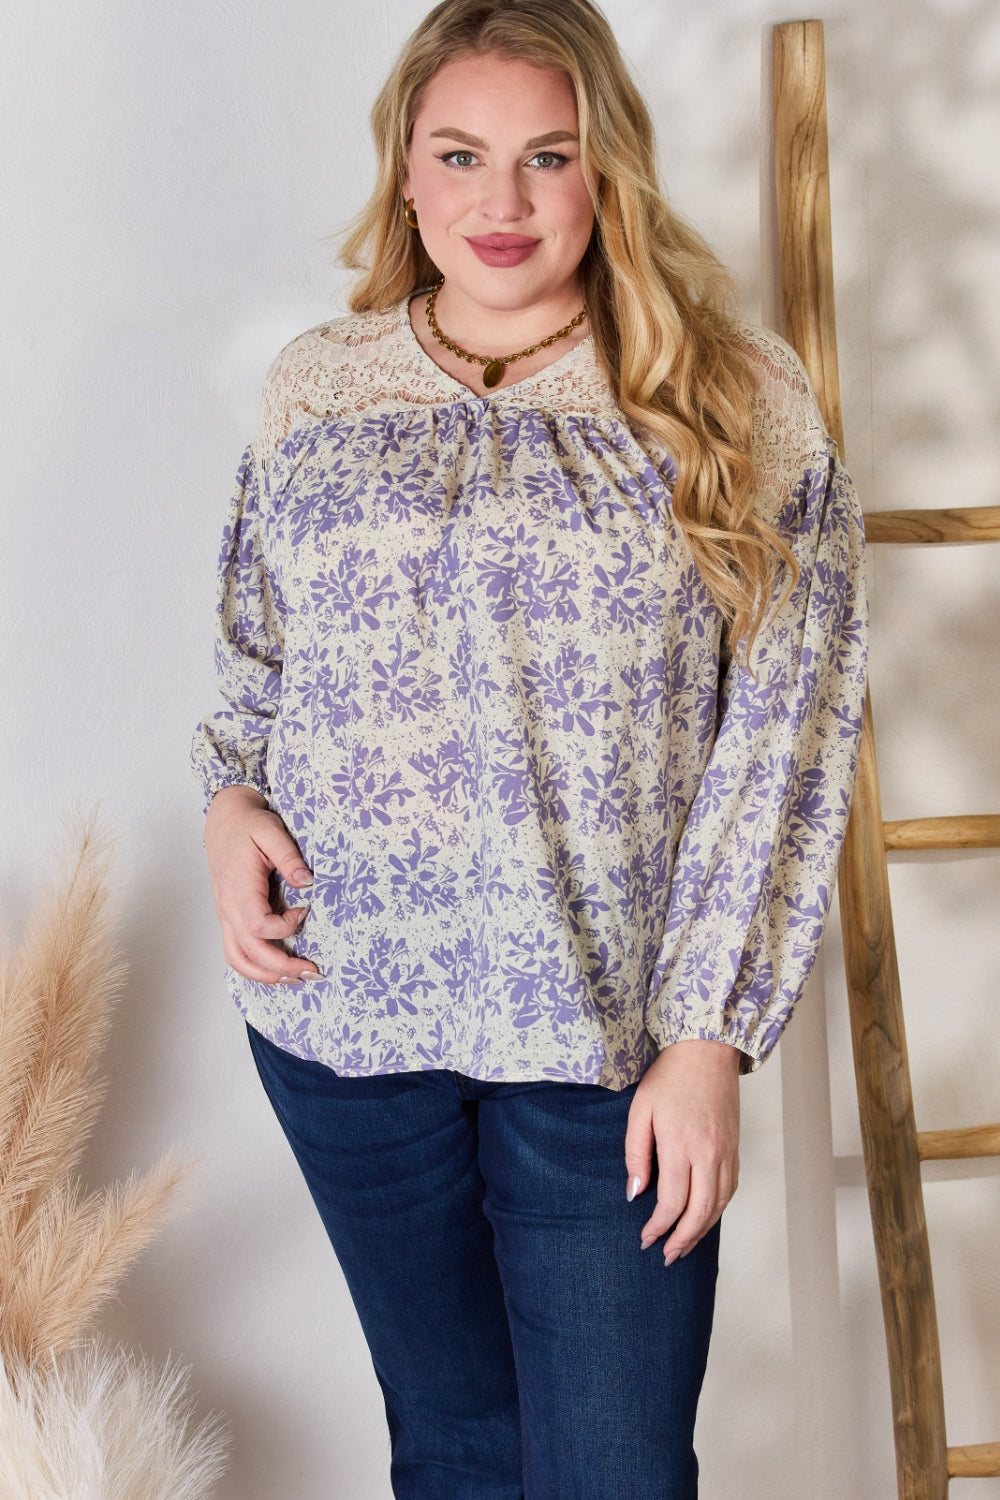 Full Size Lace Detail Printed Blouse